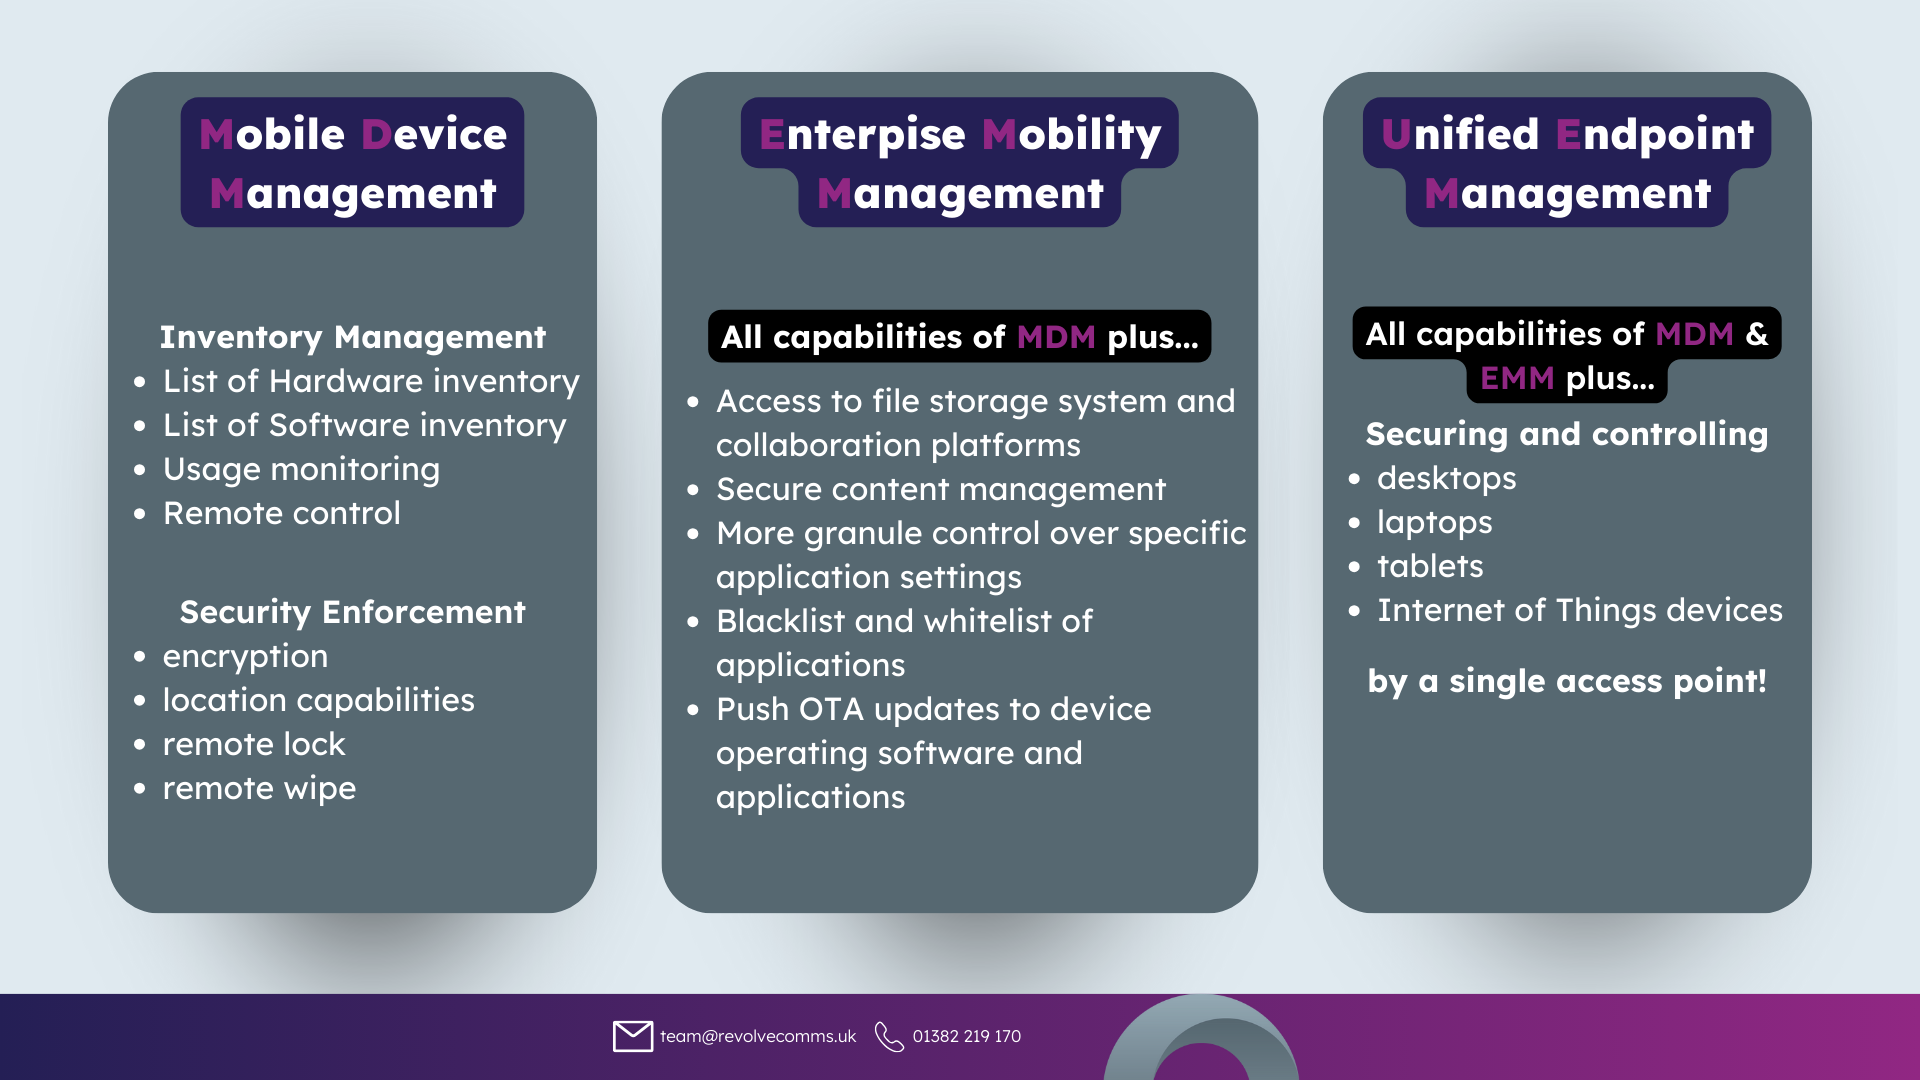 Differences between Mobile Device Management, Enterprise Mobility Management, Unified Endpoint Management